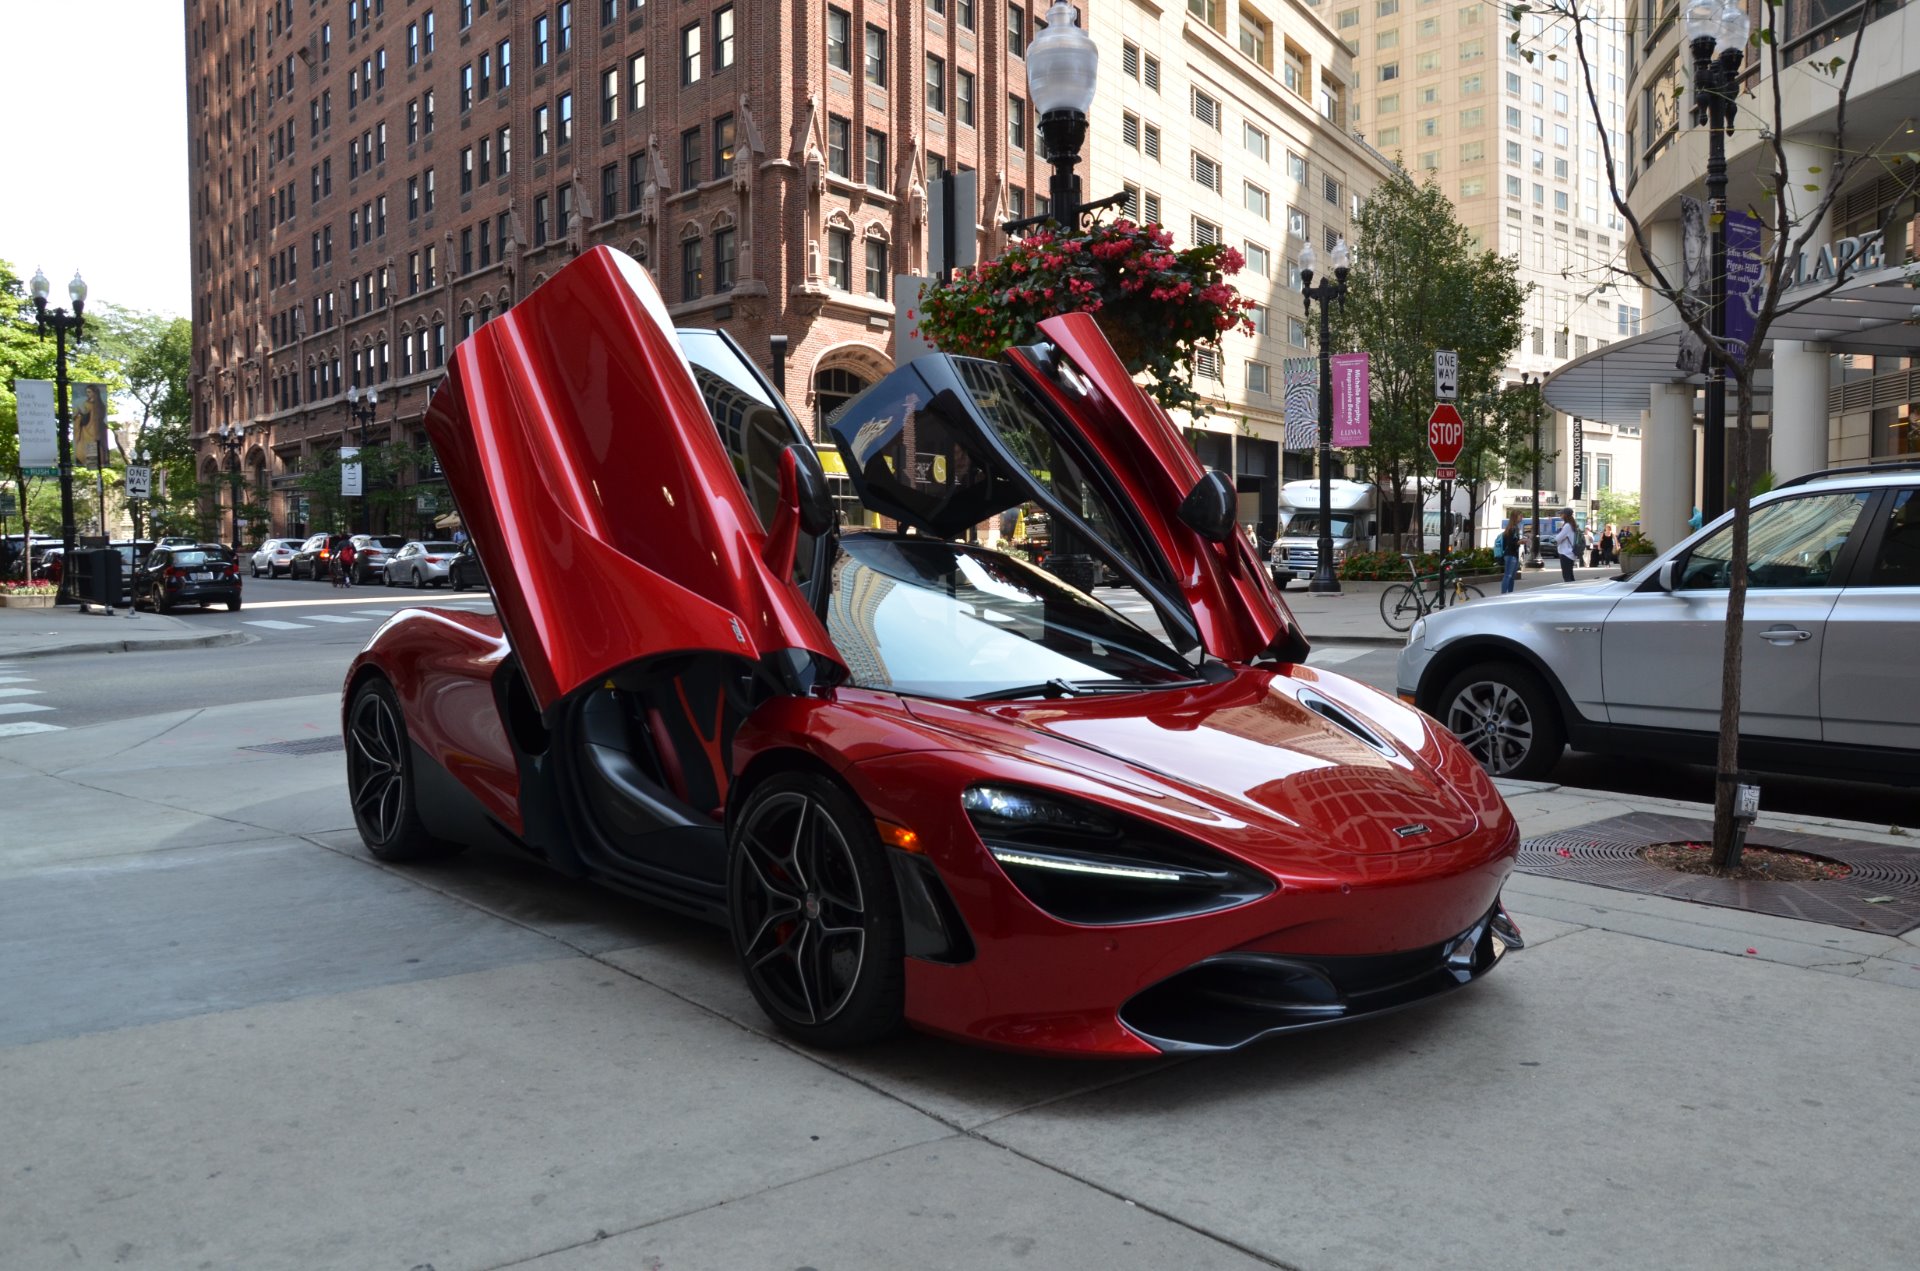 720s black and red